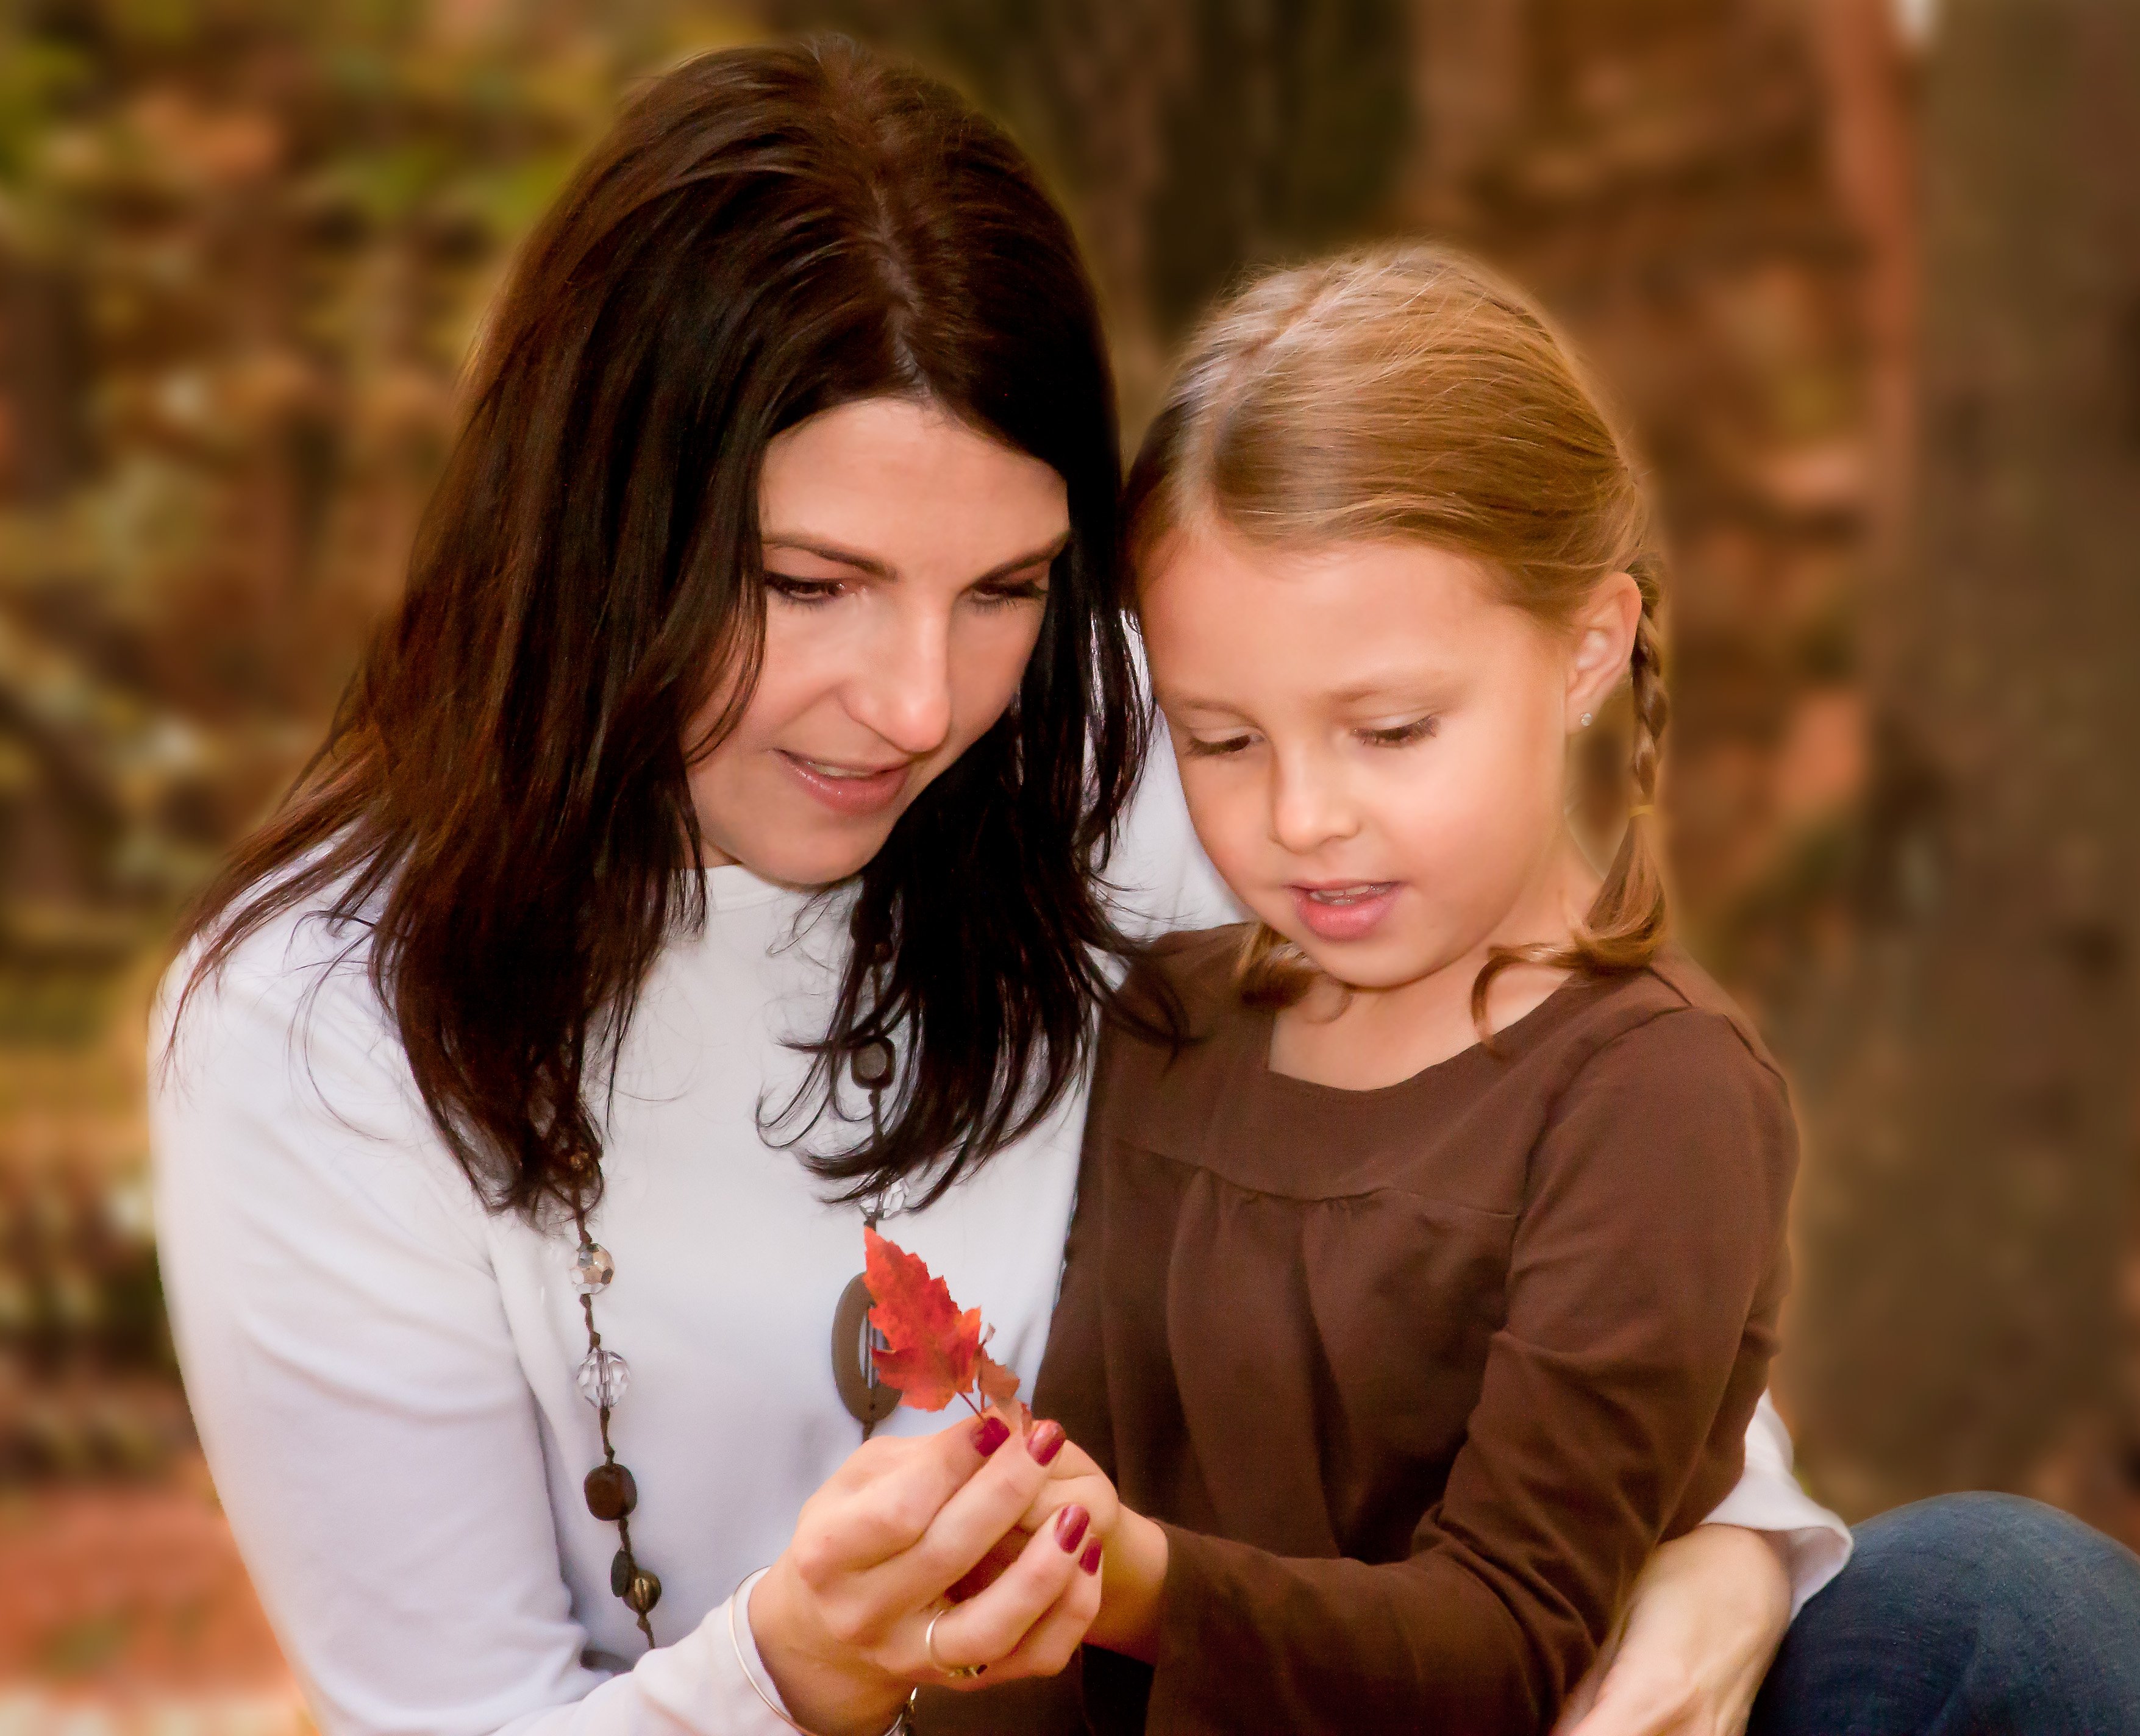 Mom and young daughter looking at a red fall leaf